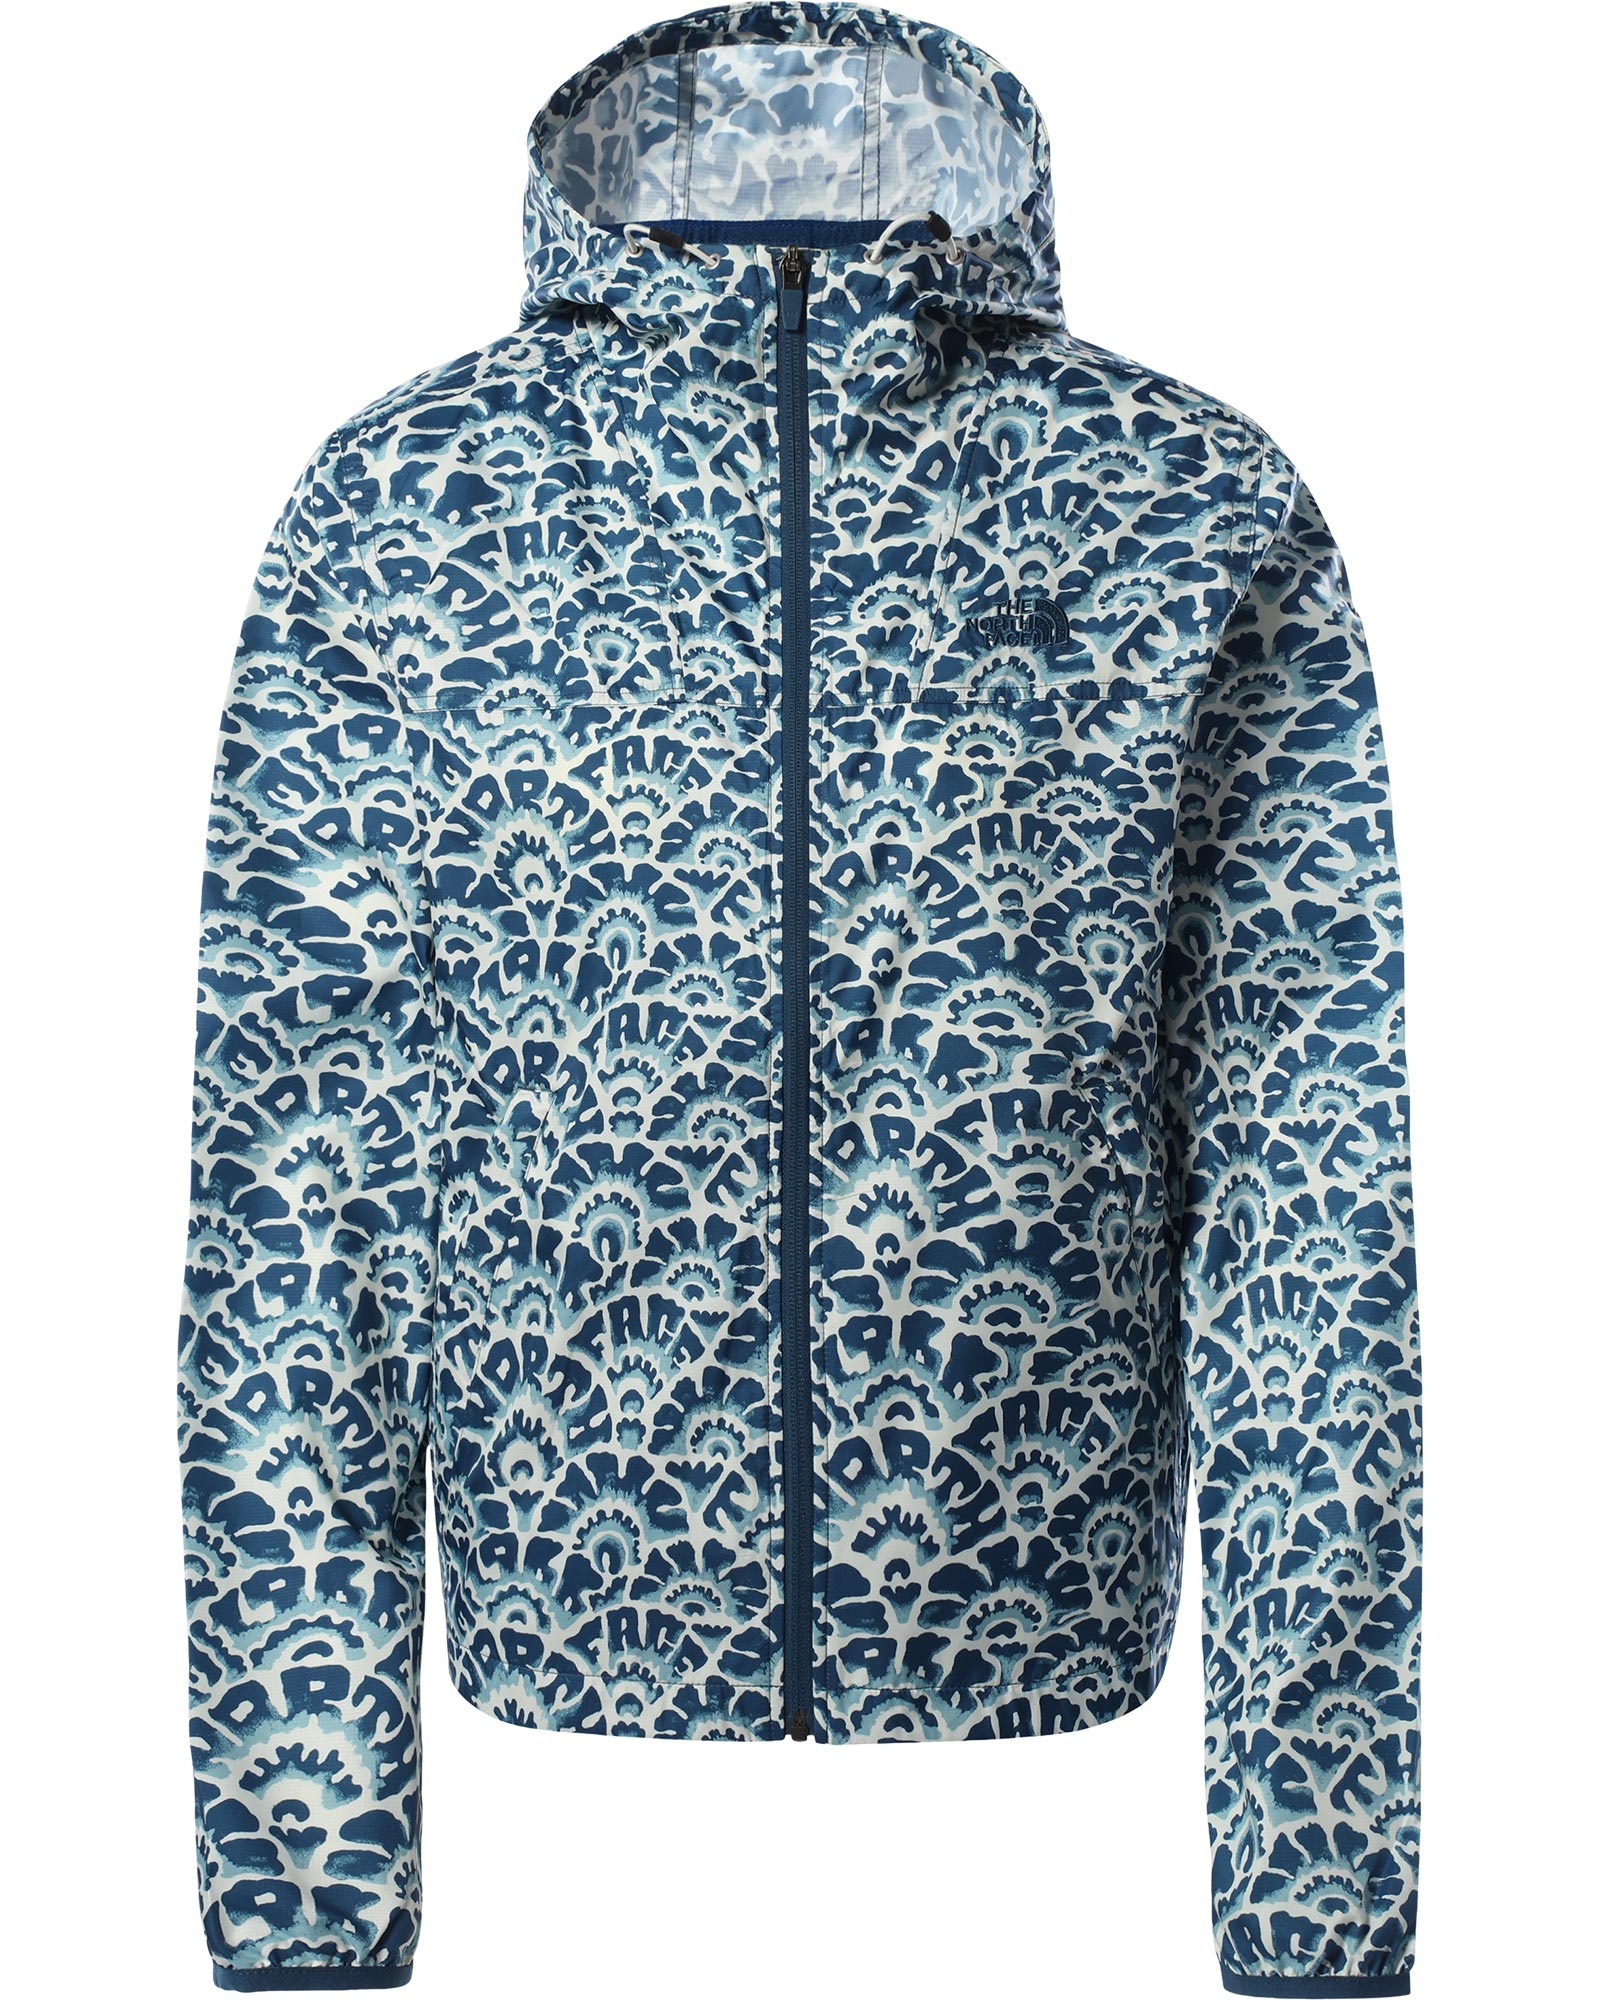 The North Face Cyclone Women’s Jacket - Monterey Blue Print XS